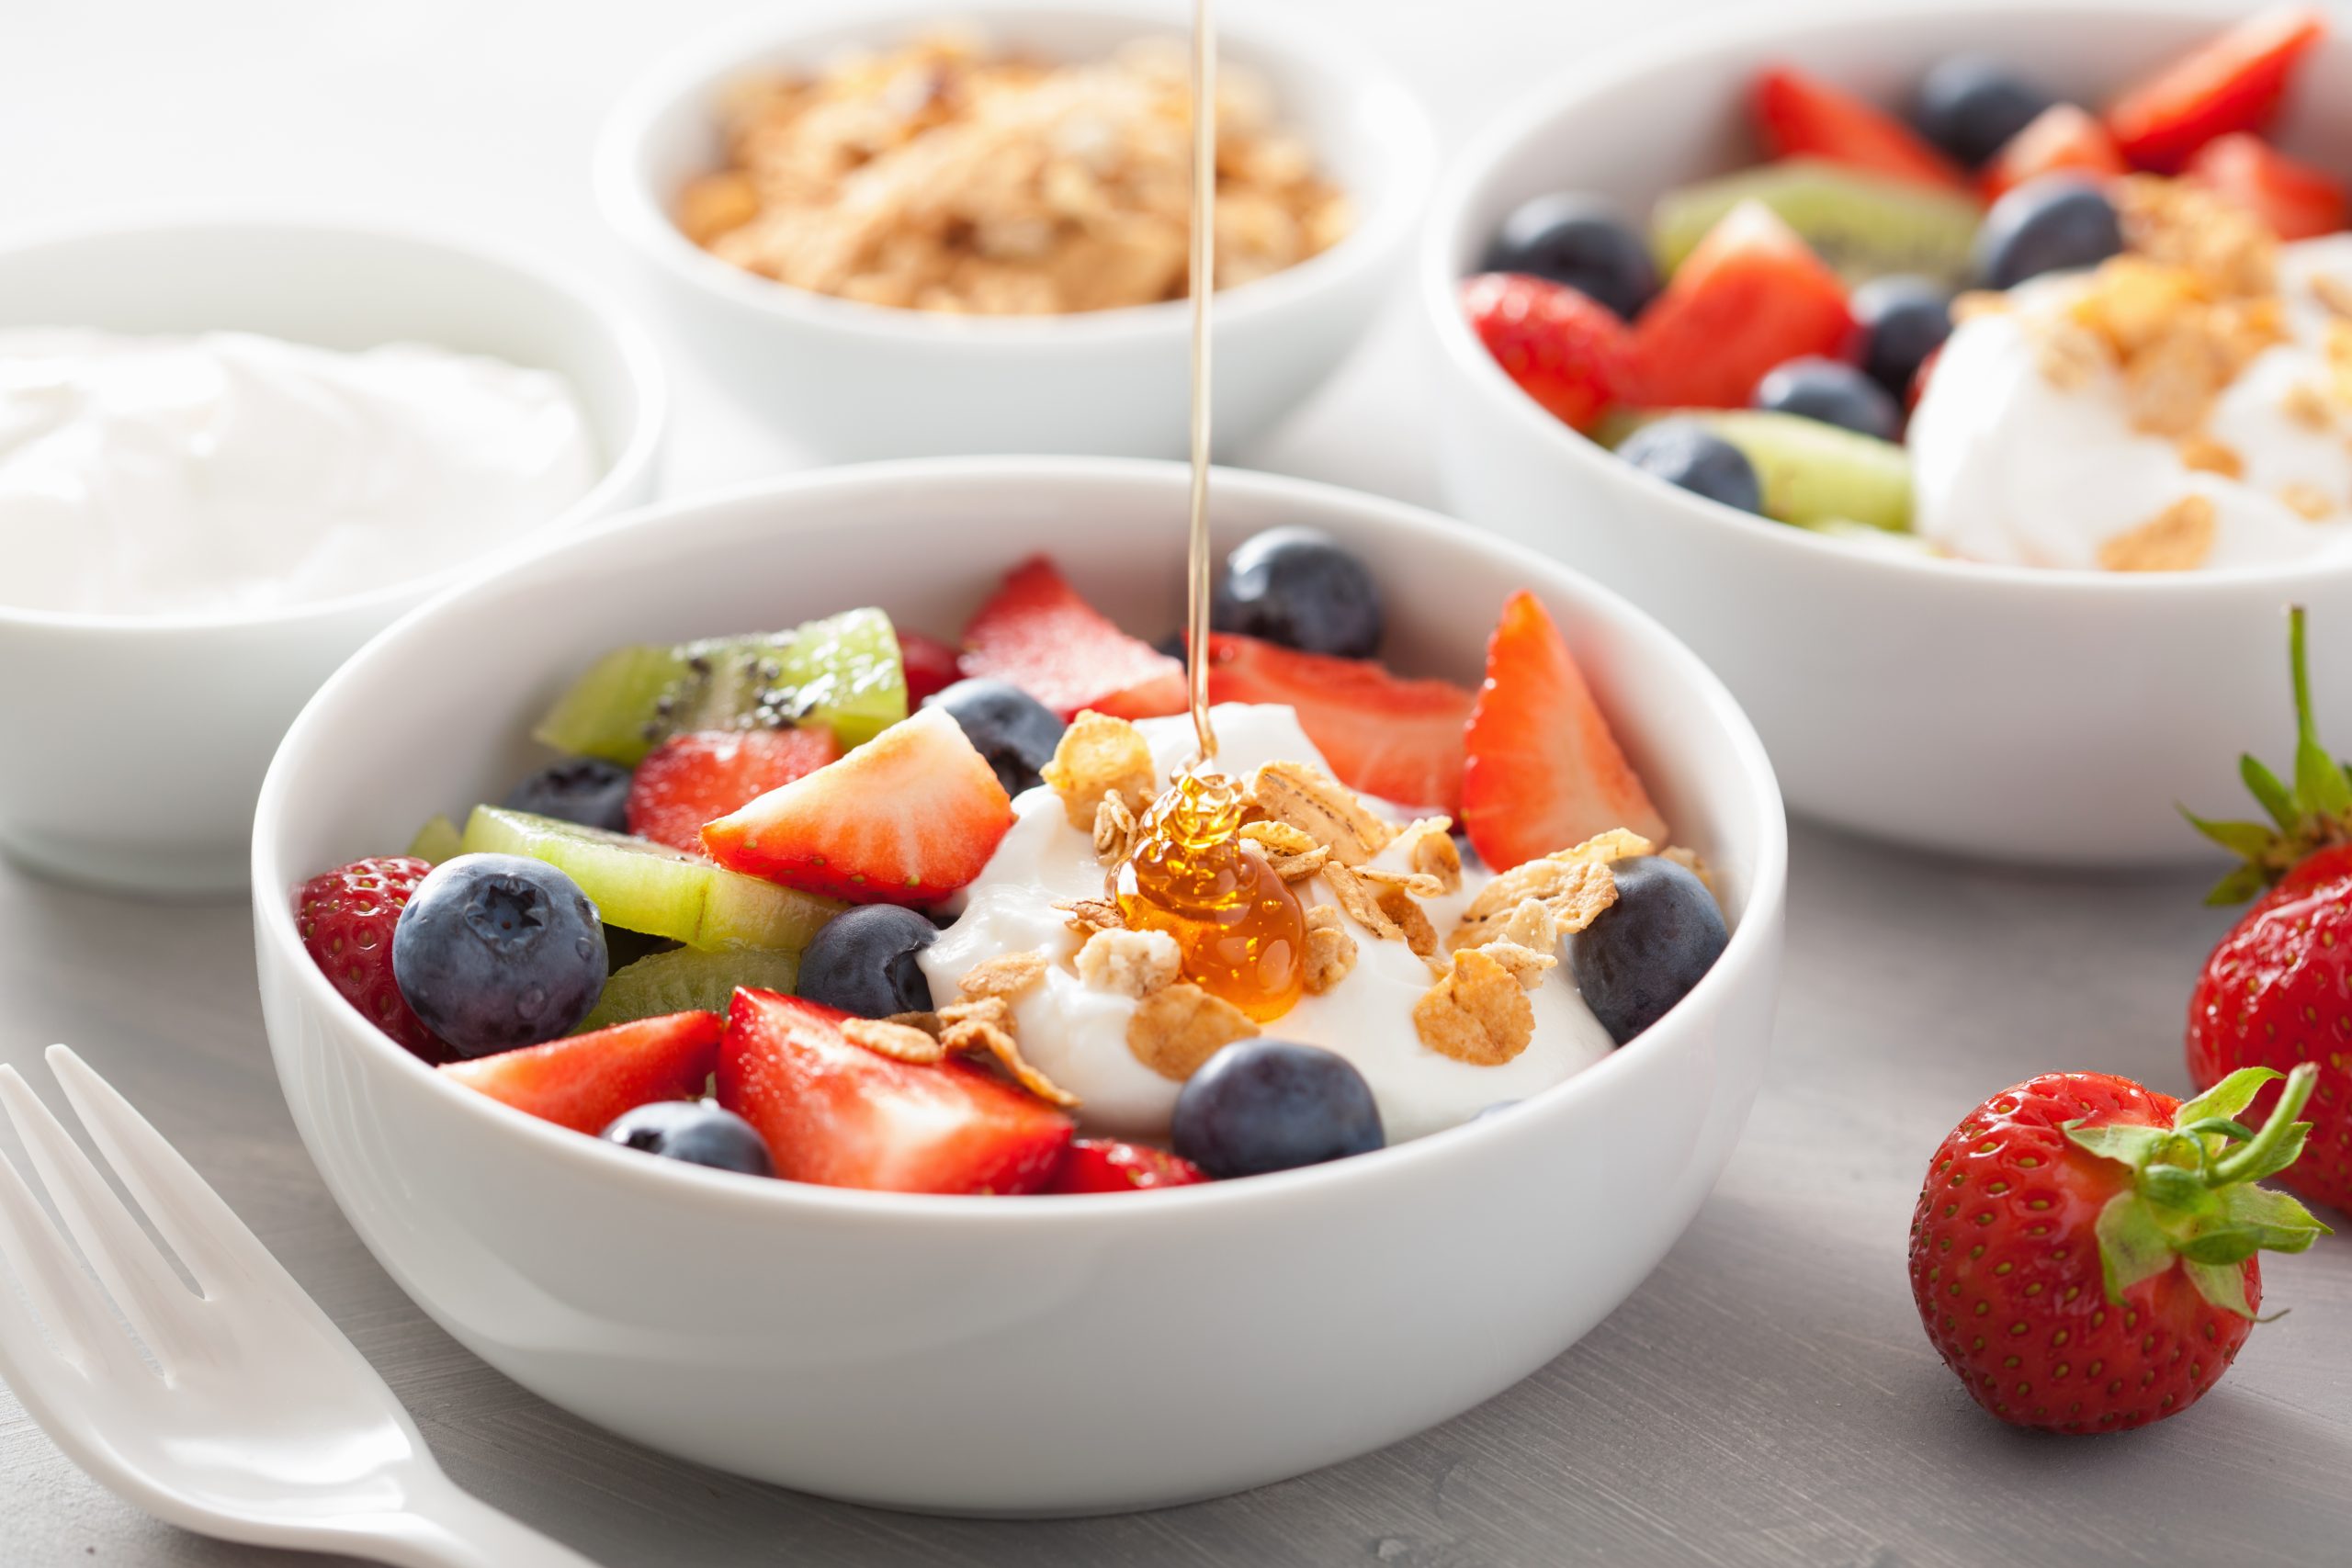 Fruit,Berry,Salad,With,Yogurt,And,Granola,For,Healthy,Breakfast